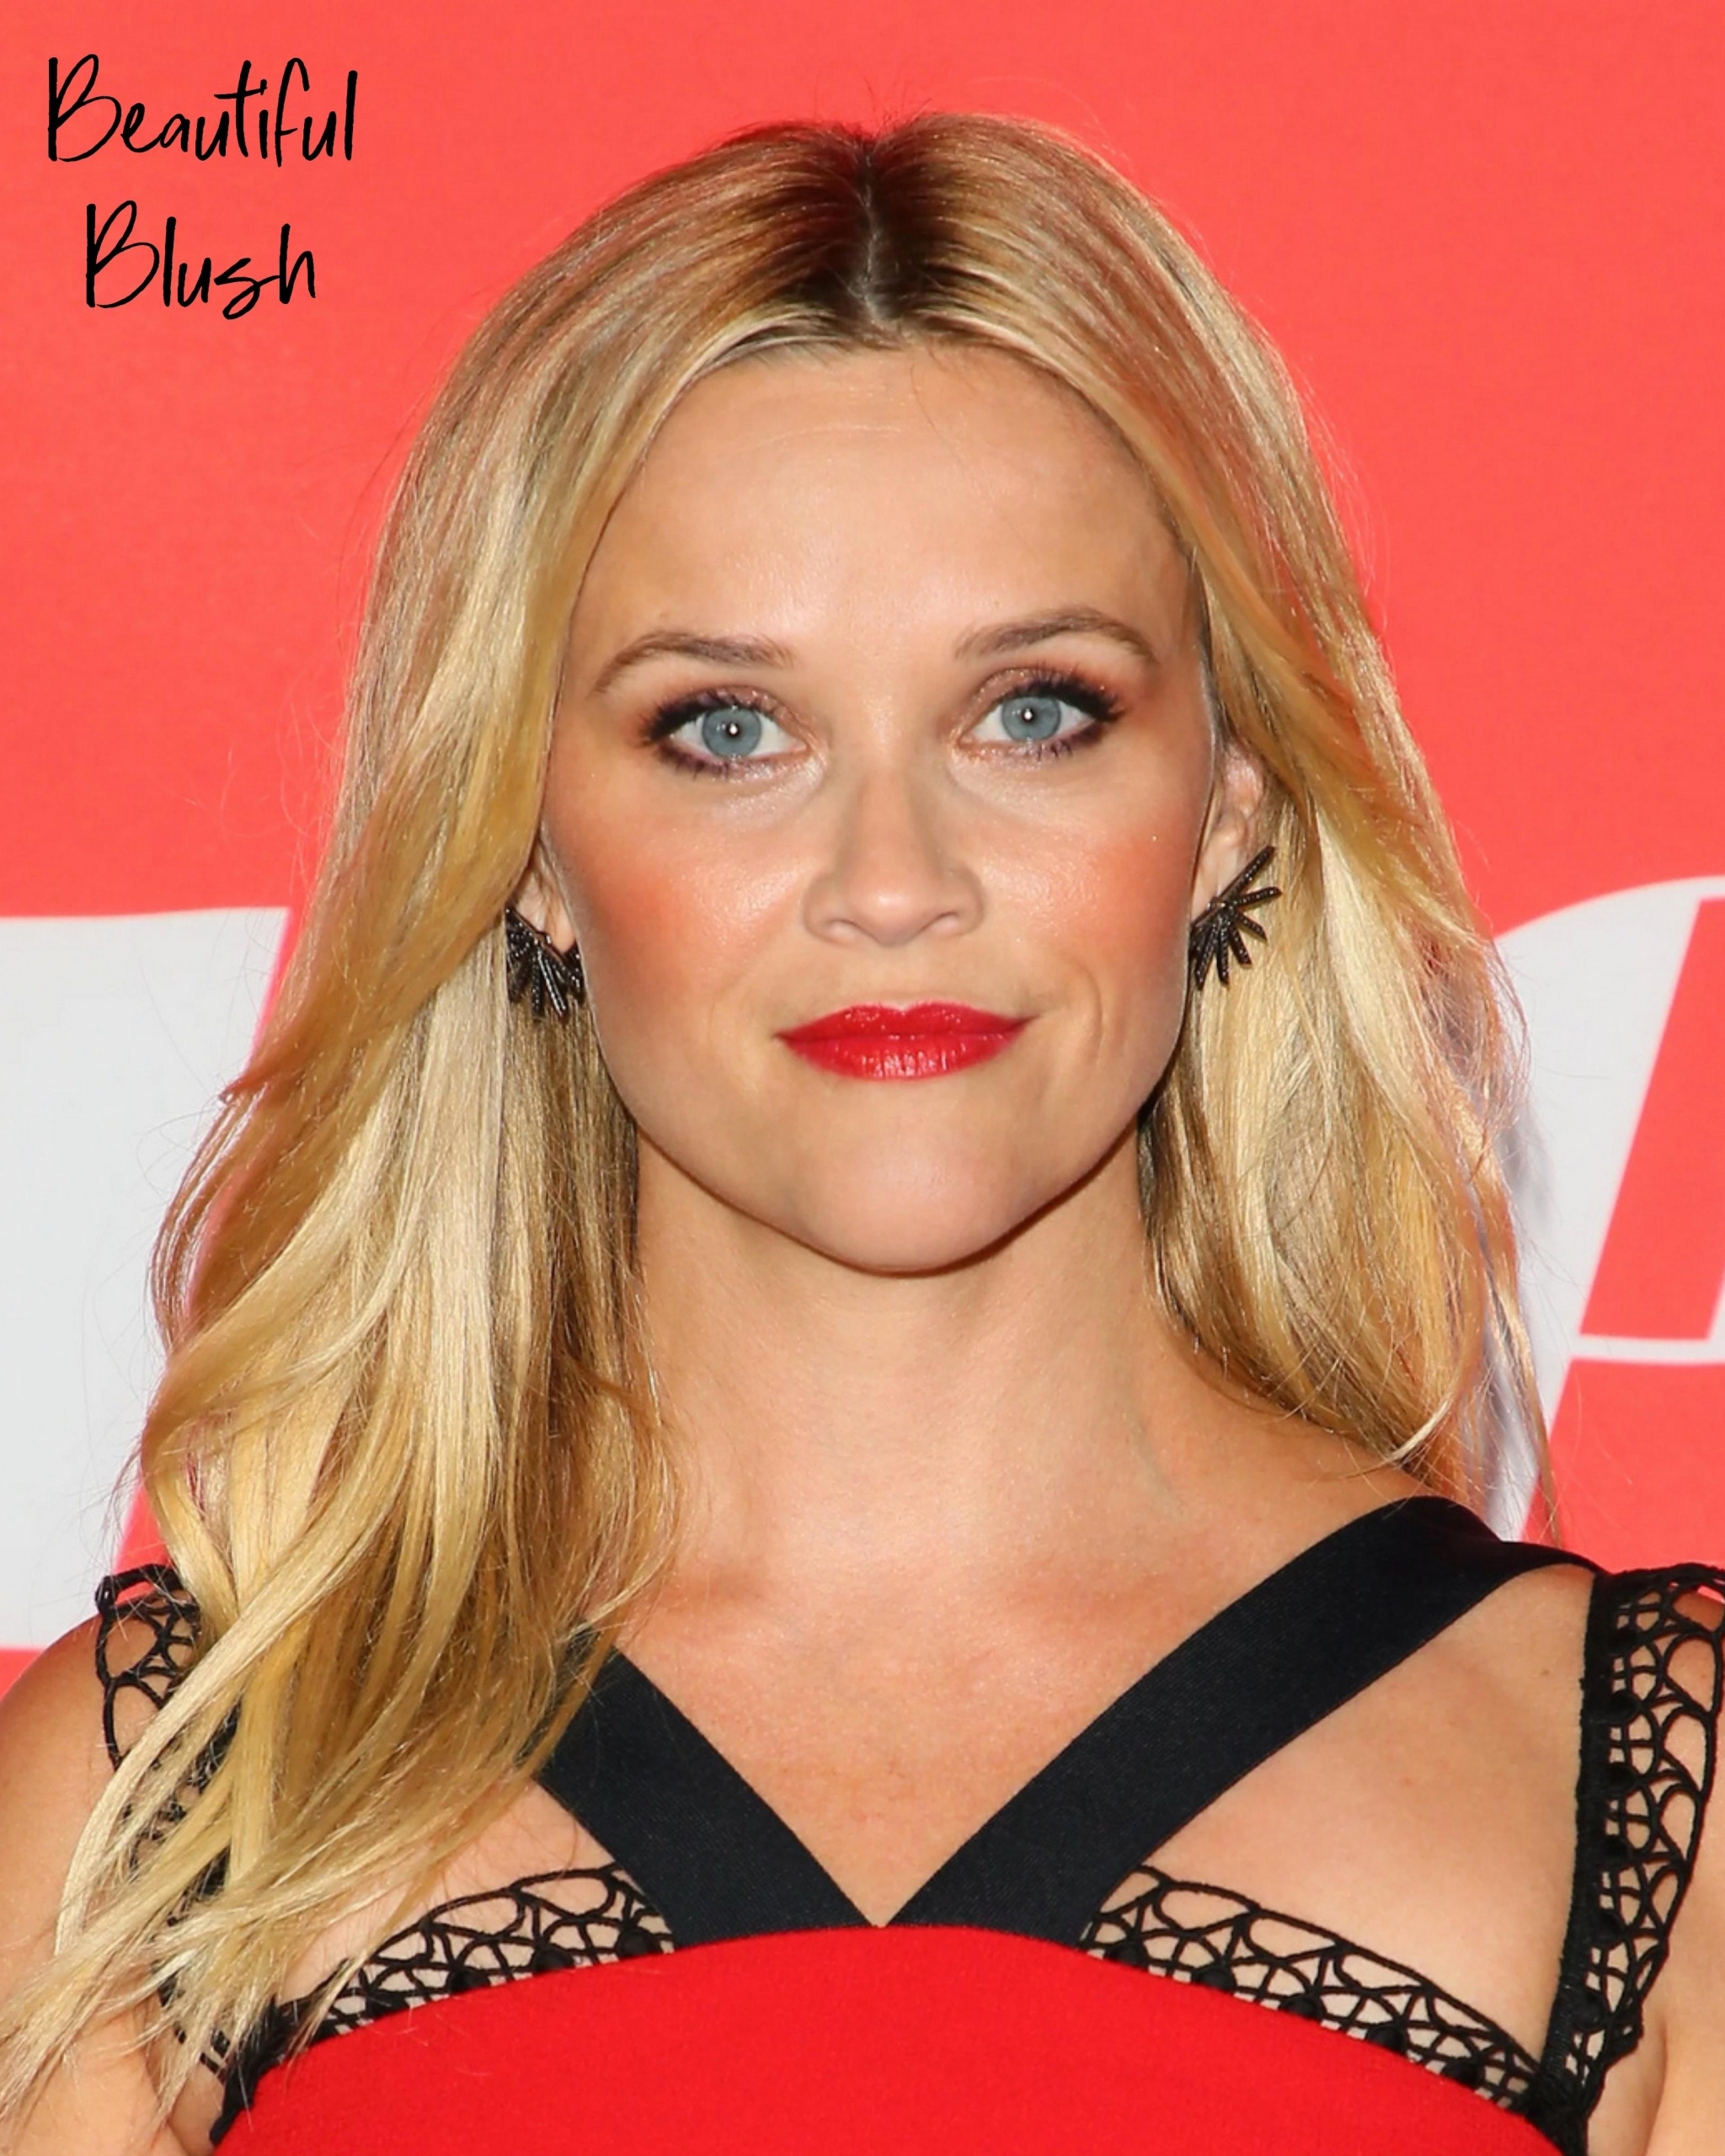 wearable summer makeup trends, celebrity makeup trends, summer makeup, best beauty trends, summer makeup looks, makeup for mature women, beauty trends makeup, summer makeup trends, bright blush trend, easy summer makeup, Reese Witherspoon with bright blush face makeup